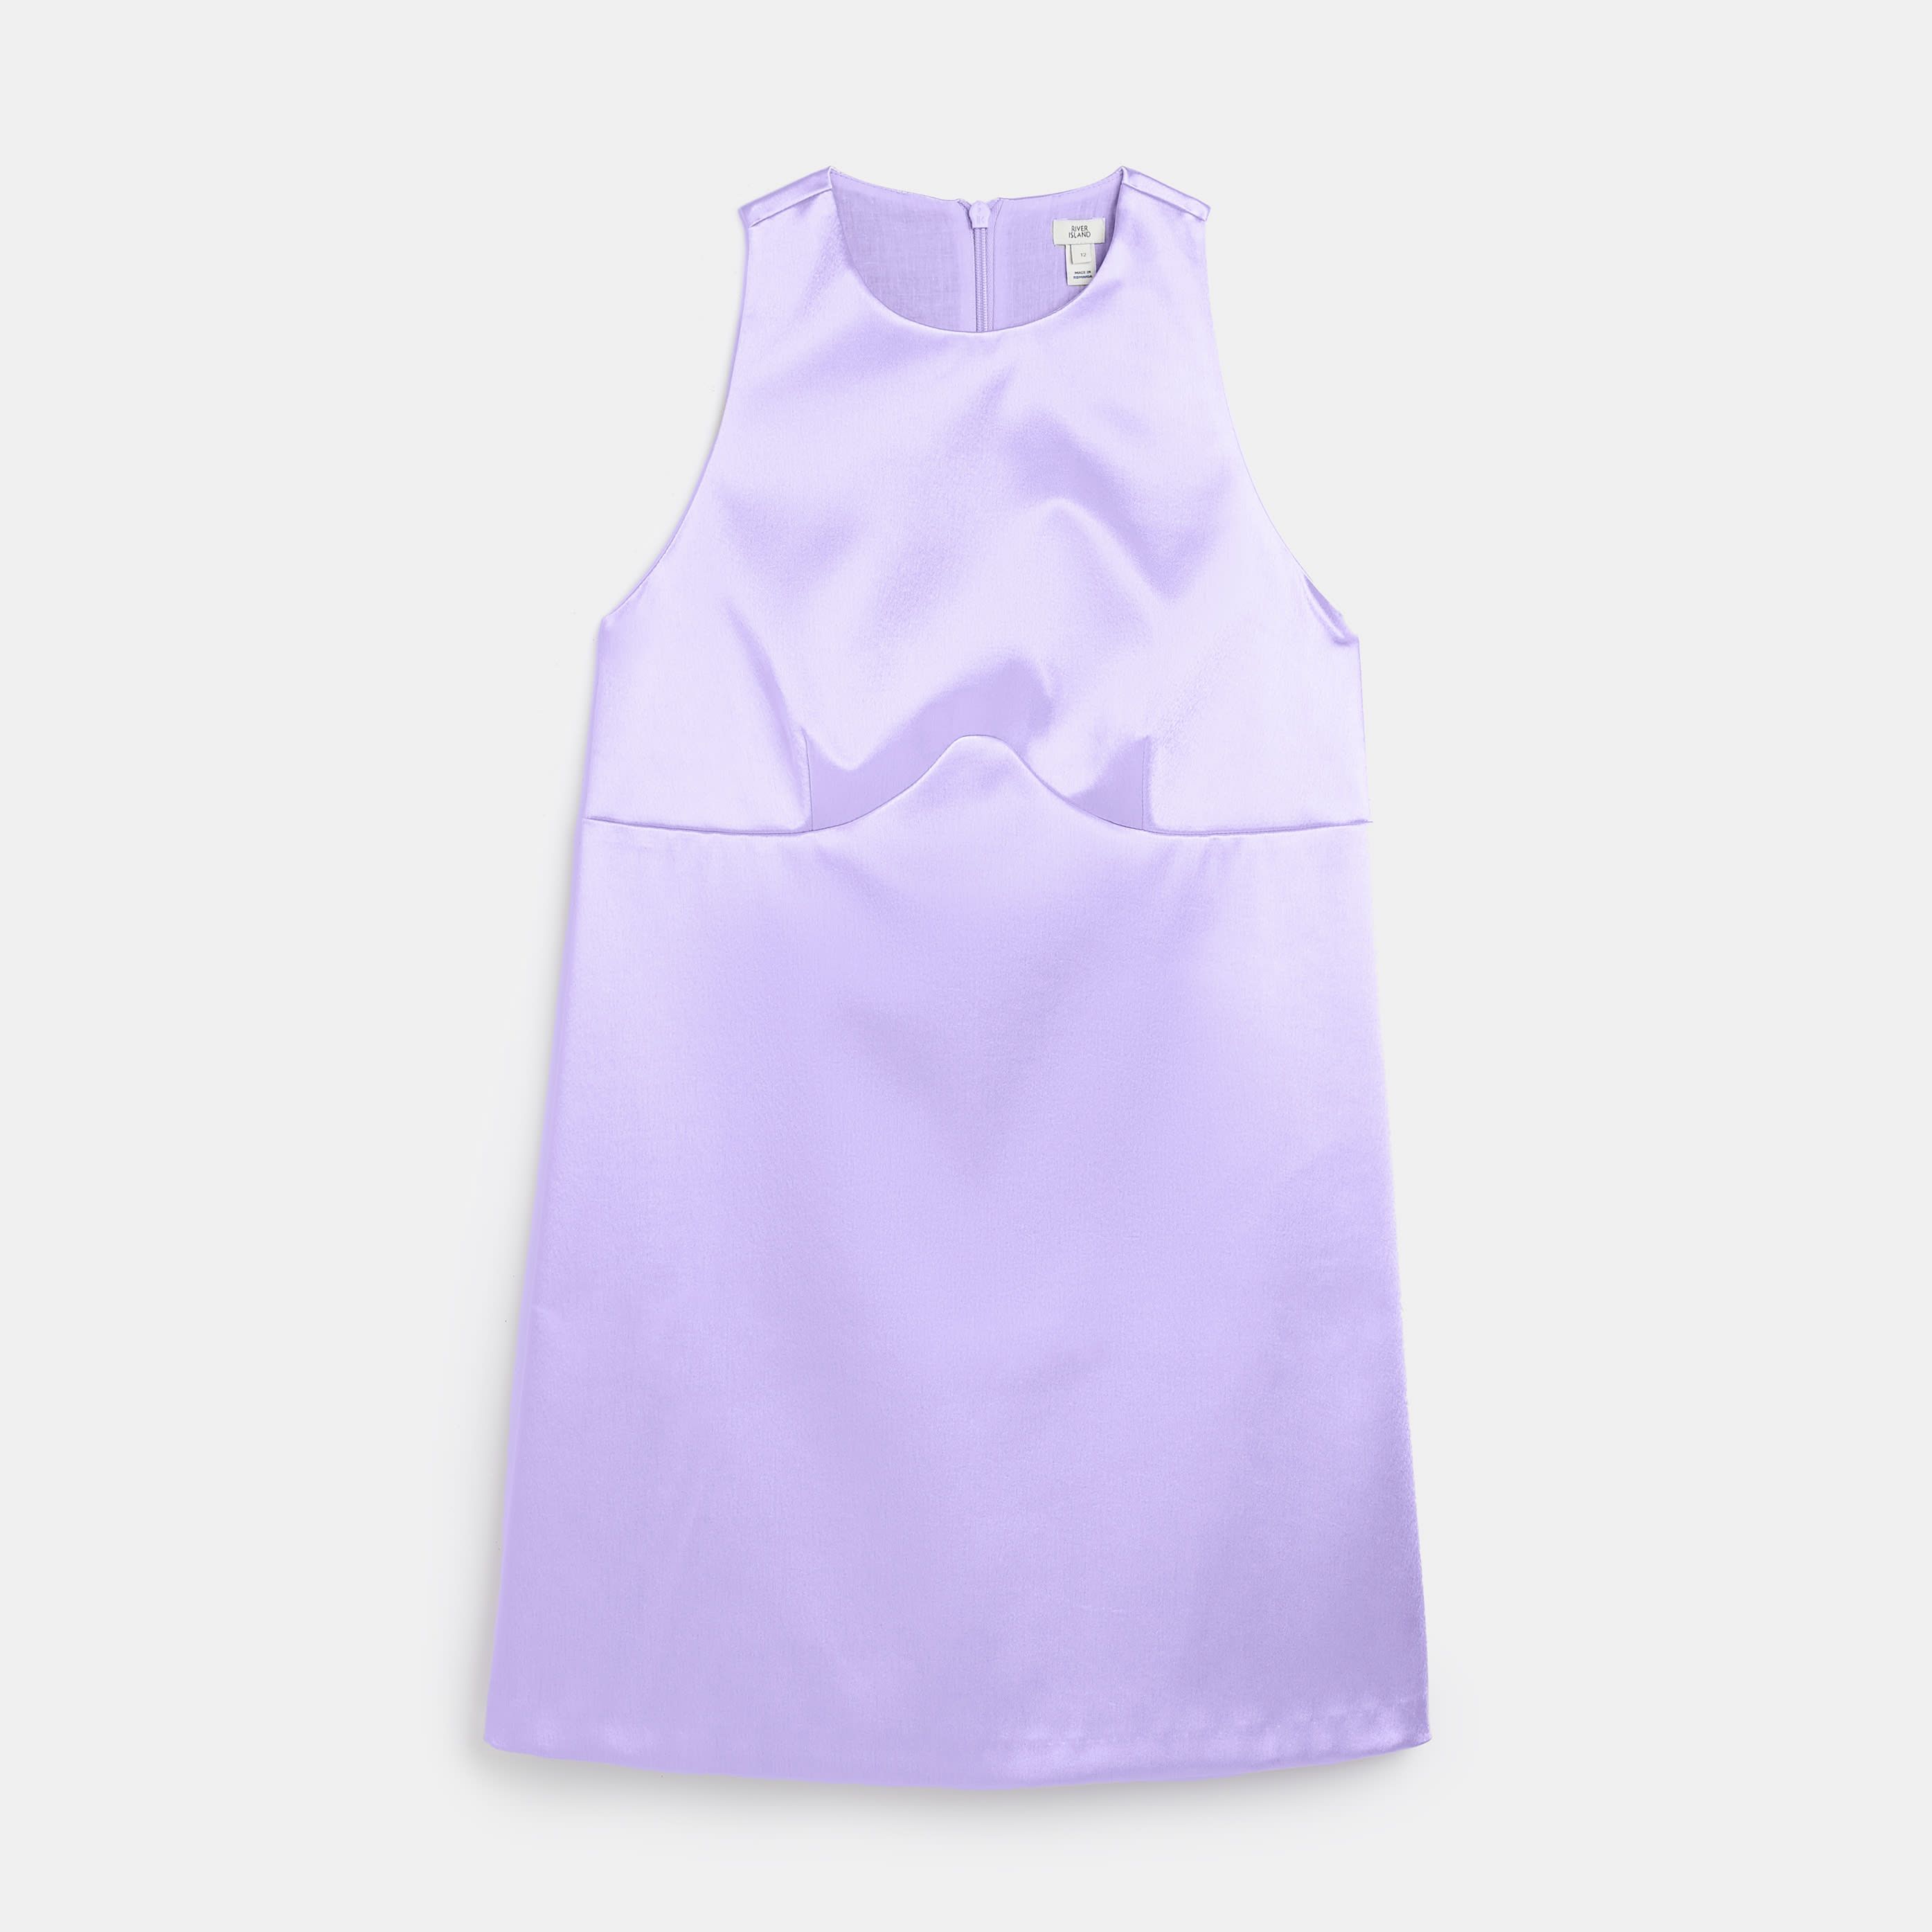 > Brand: River Island> Department: Women> Style: Mini> Colour: Purple> Material Composition: 100% Polyester> Material: Polyester> Neckline: Crew Neck> Dress Length: Short> Occasion: Casual> Pattern: No Pattern> Fit: Regular> Size Type: Regular> Season: SS22